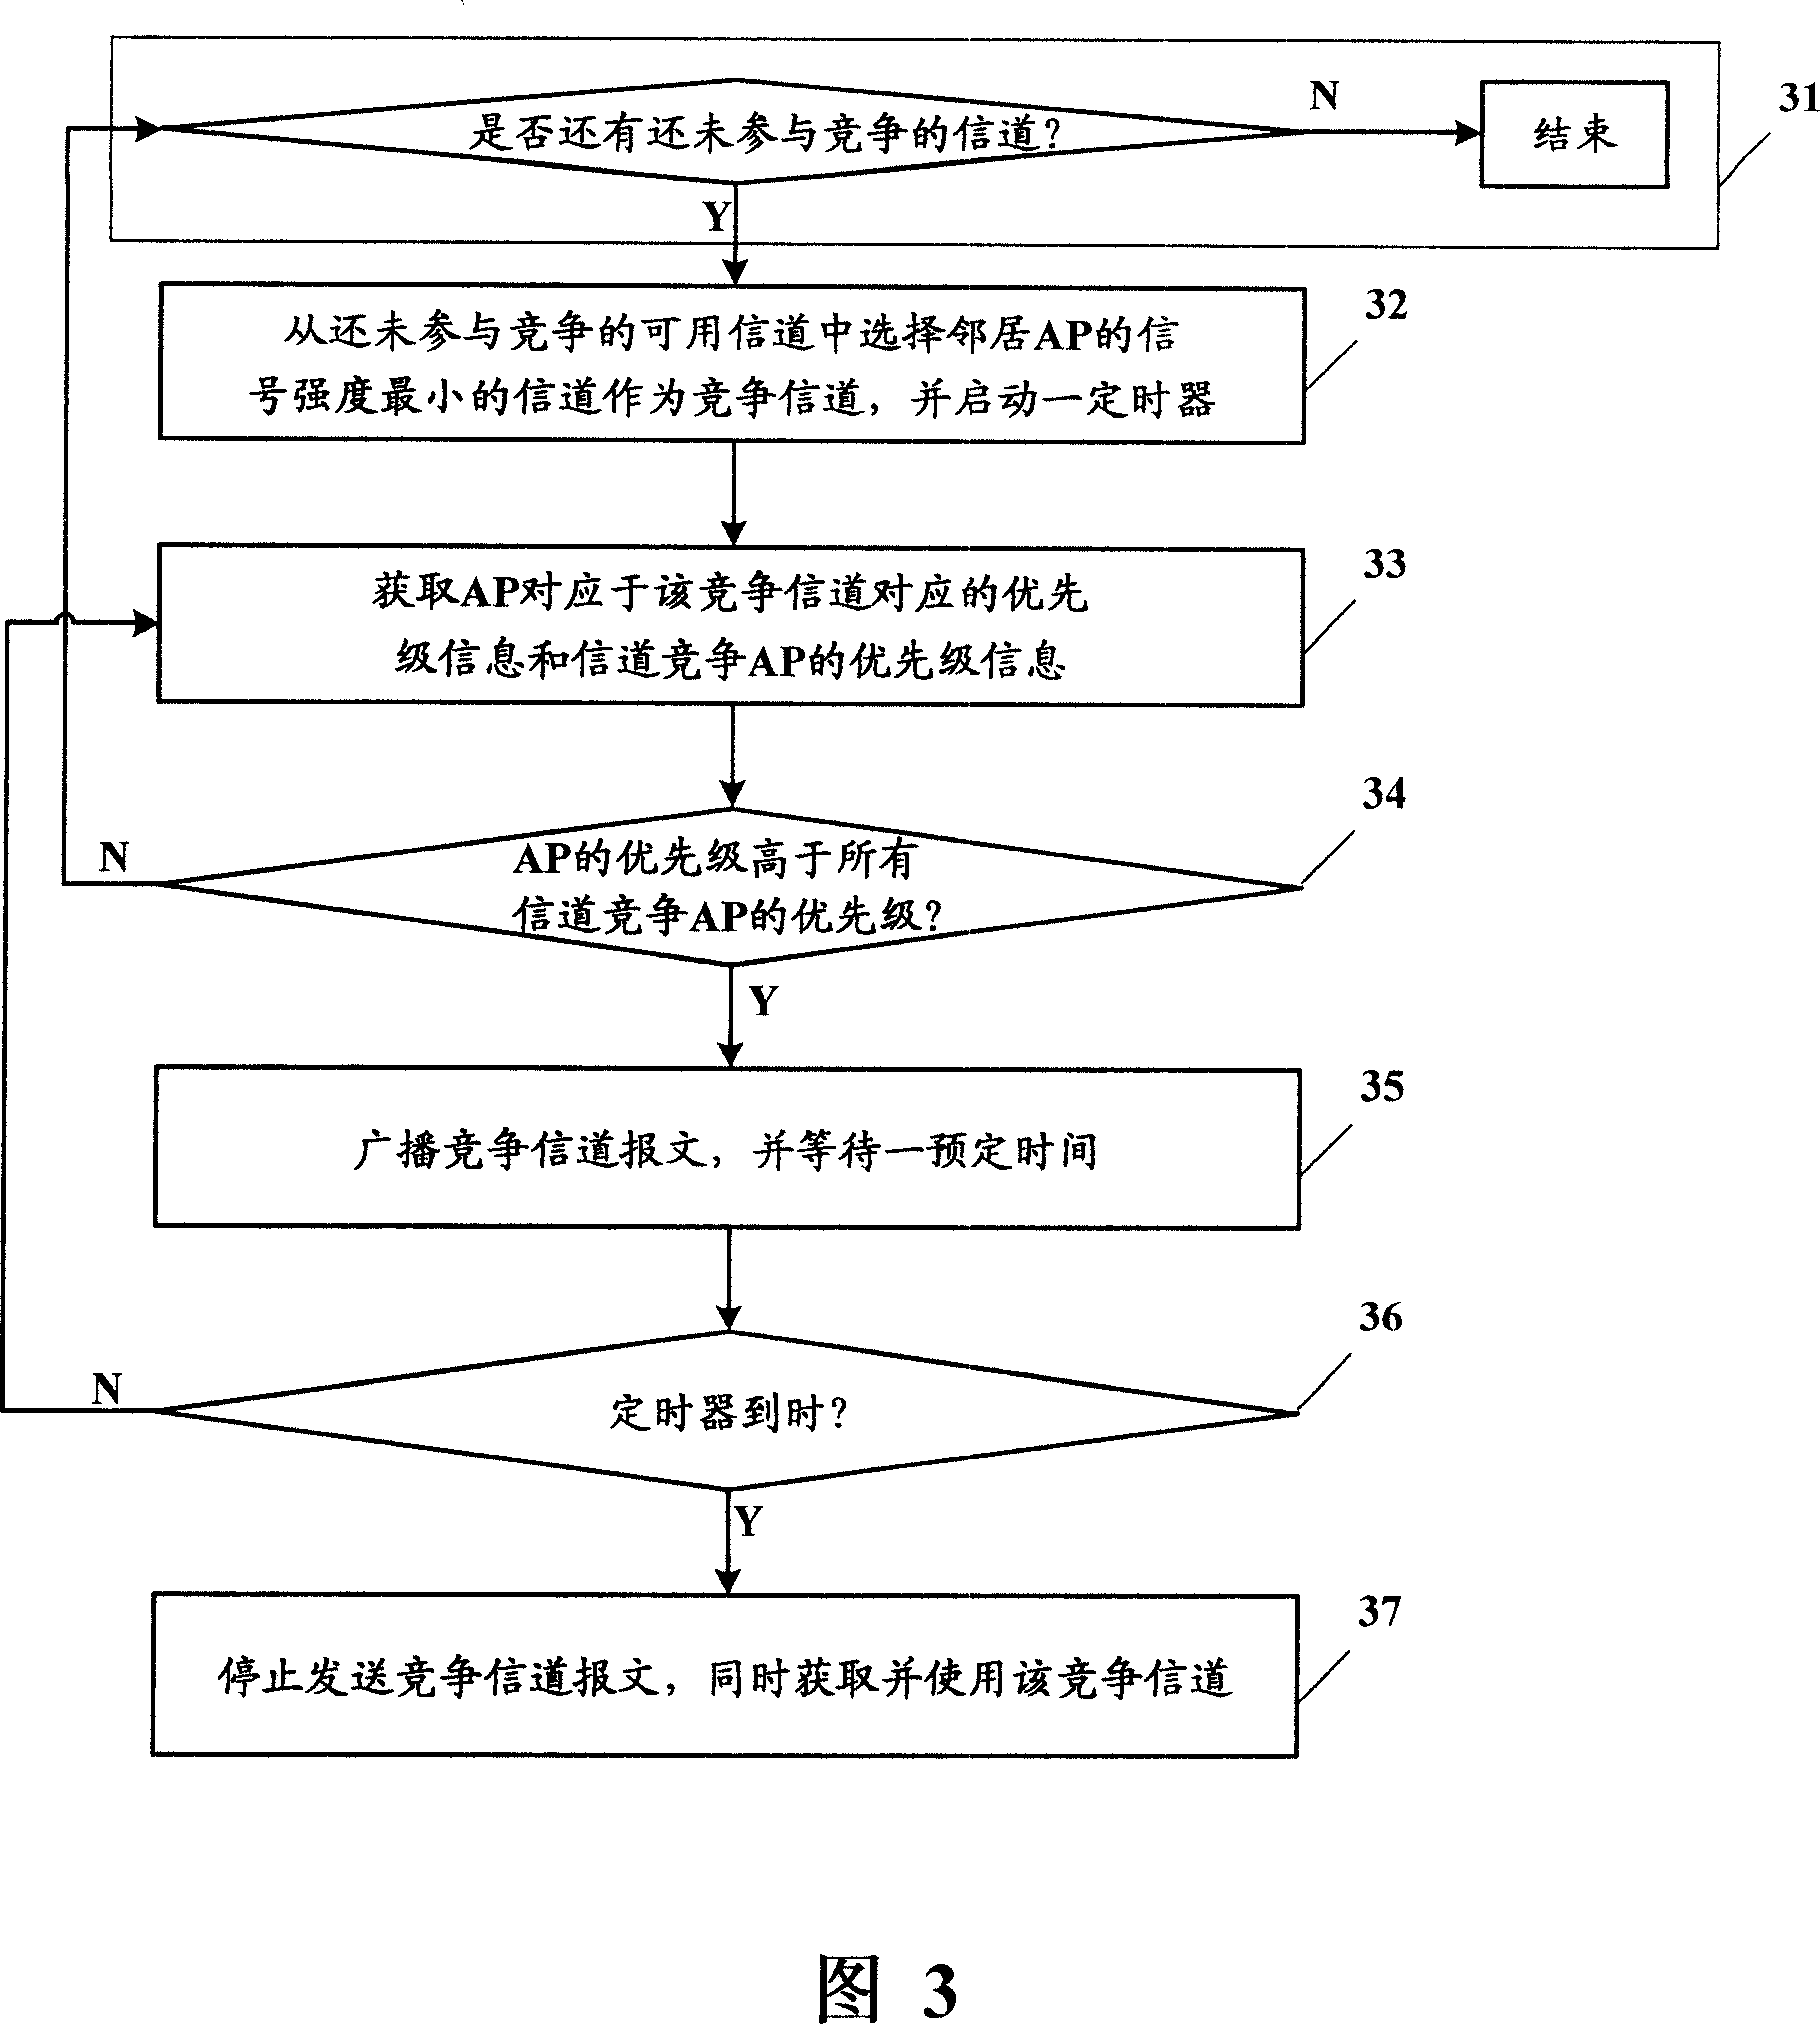 Device, method, AP, central controller, software and device for AP channel selection